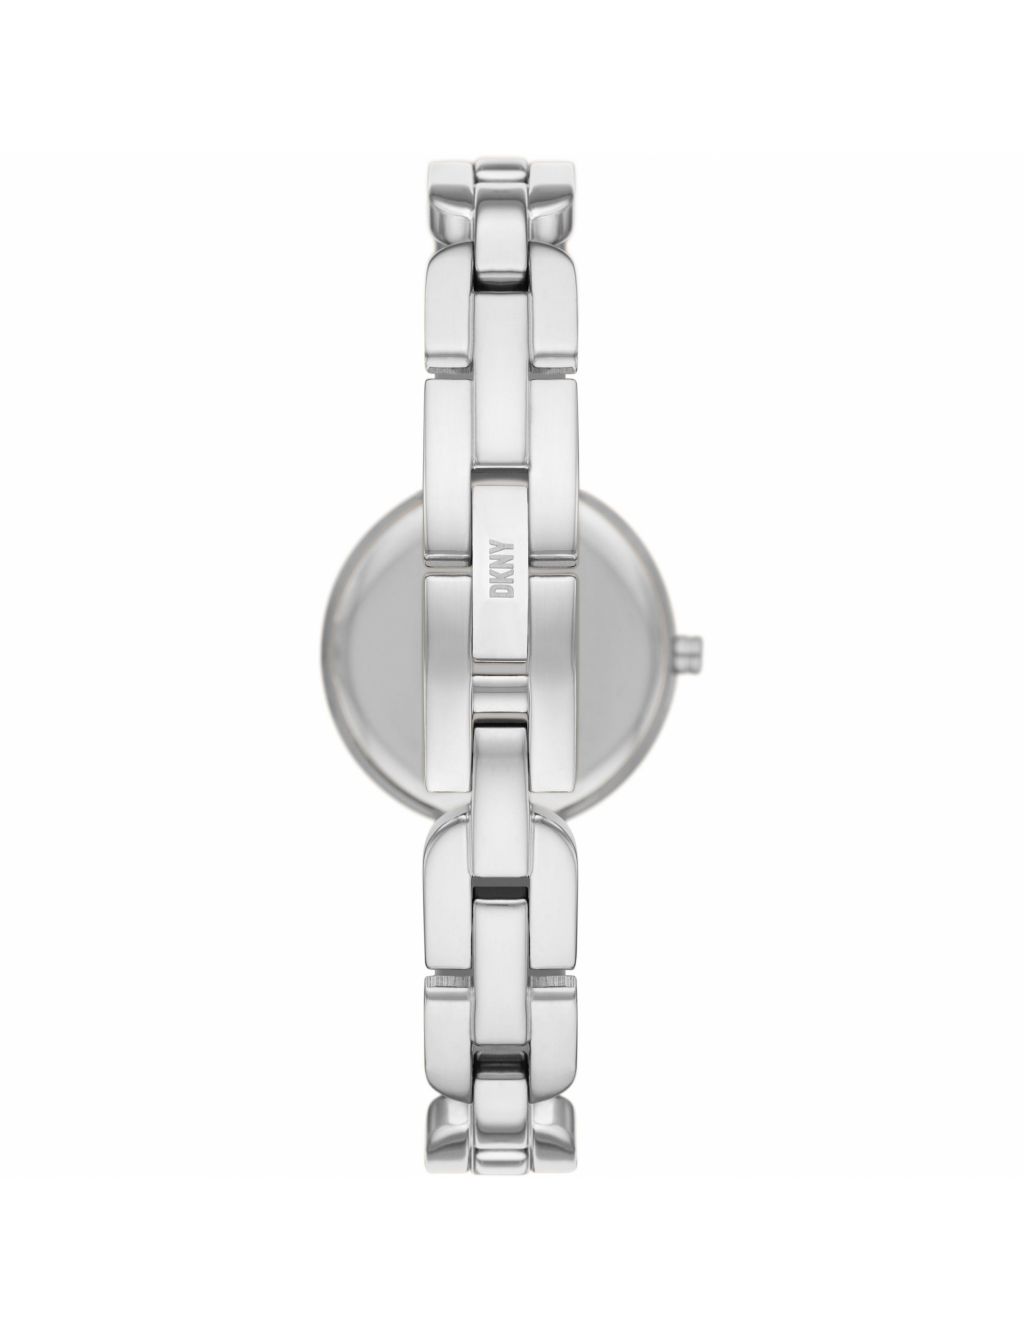 DKNY City Link Silver Watch image 2